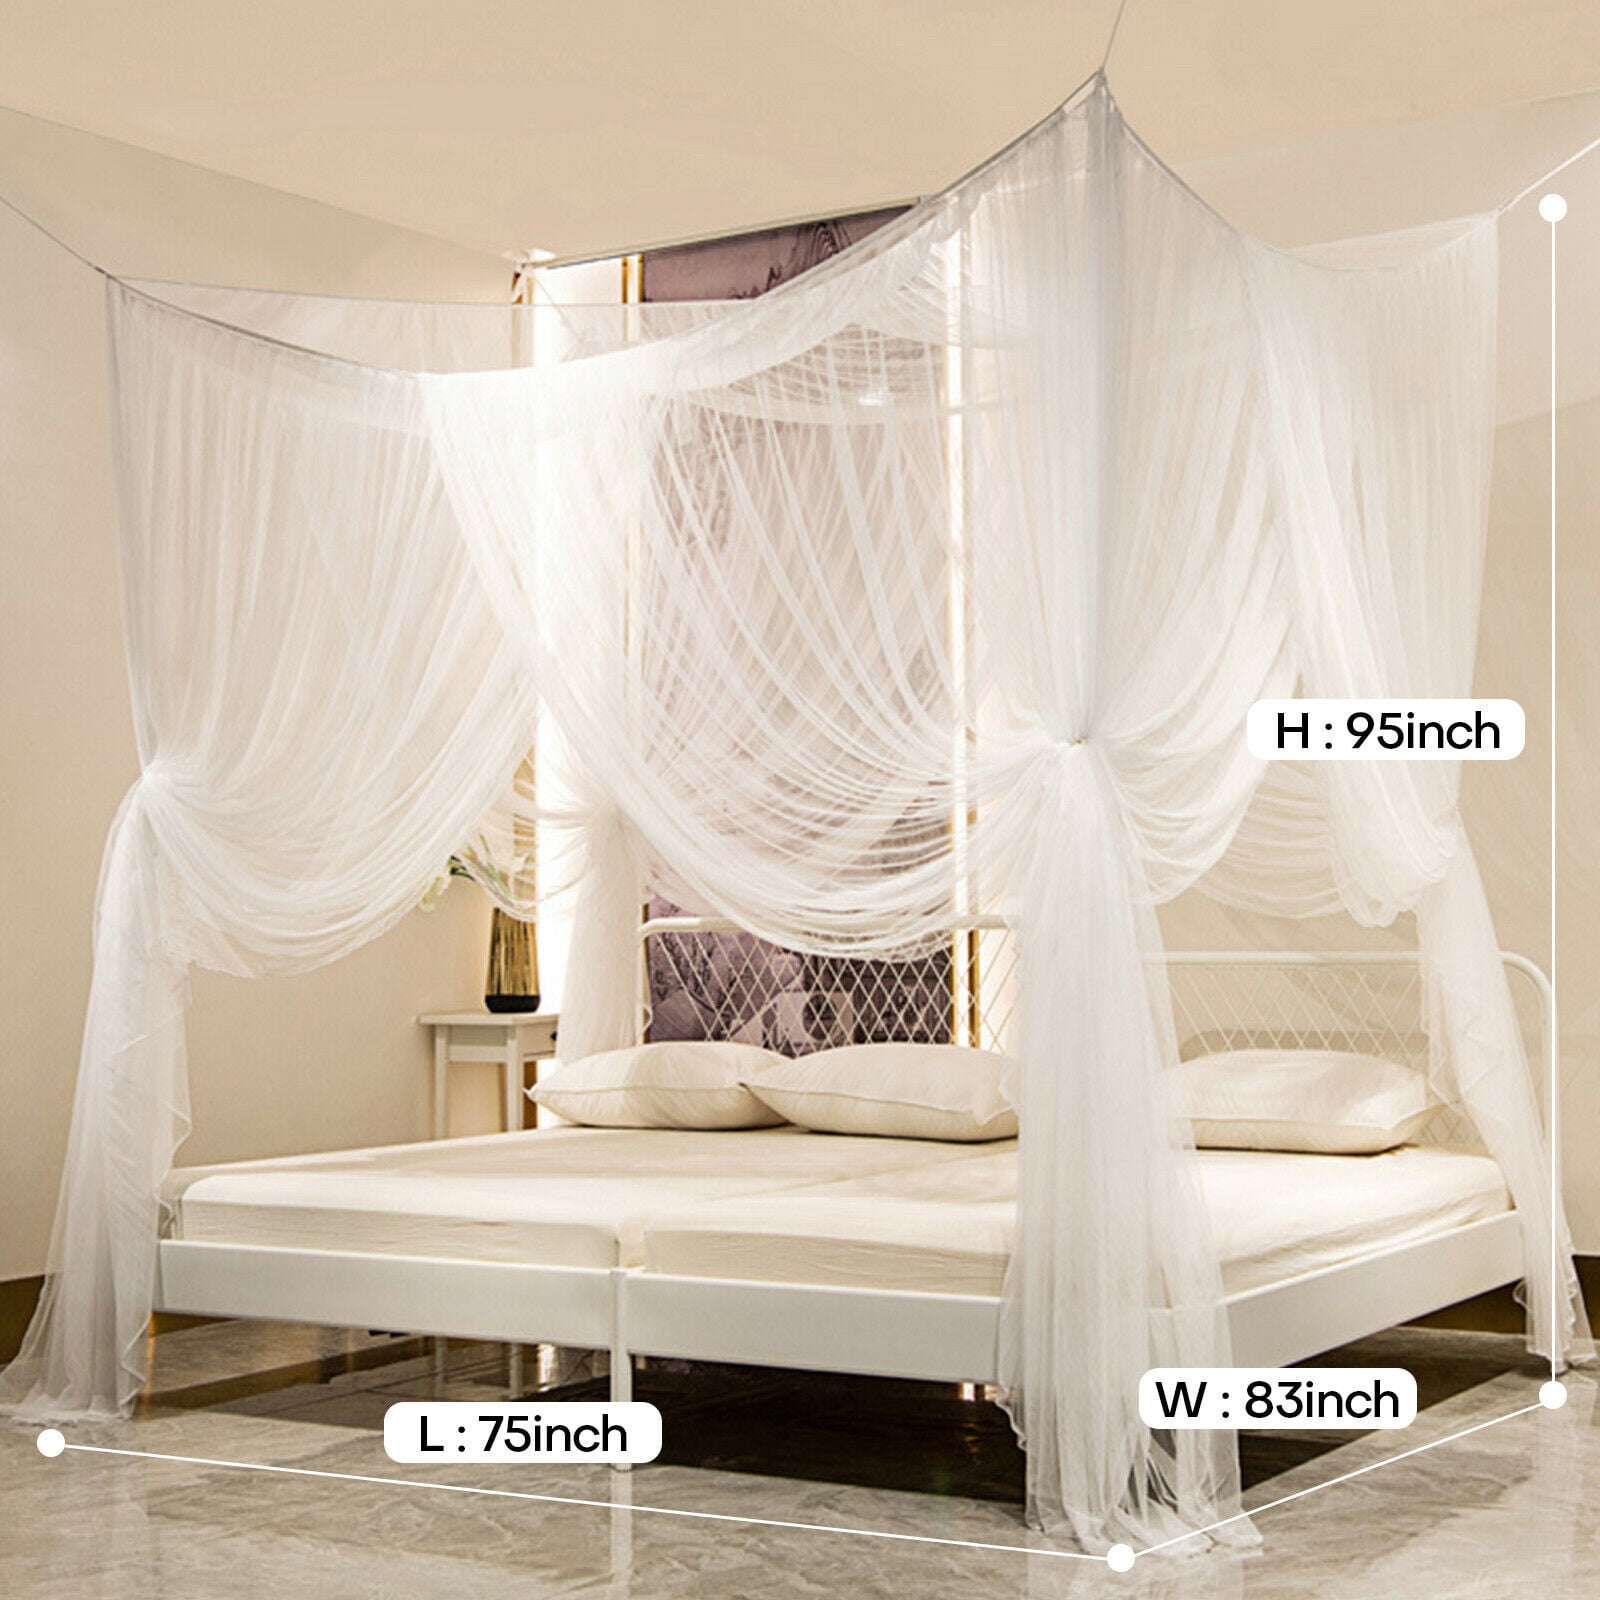 Cream/Champagne 4 Poster Mosquito Net Bed Canopy NEW! 